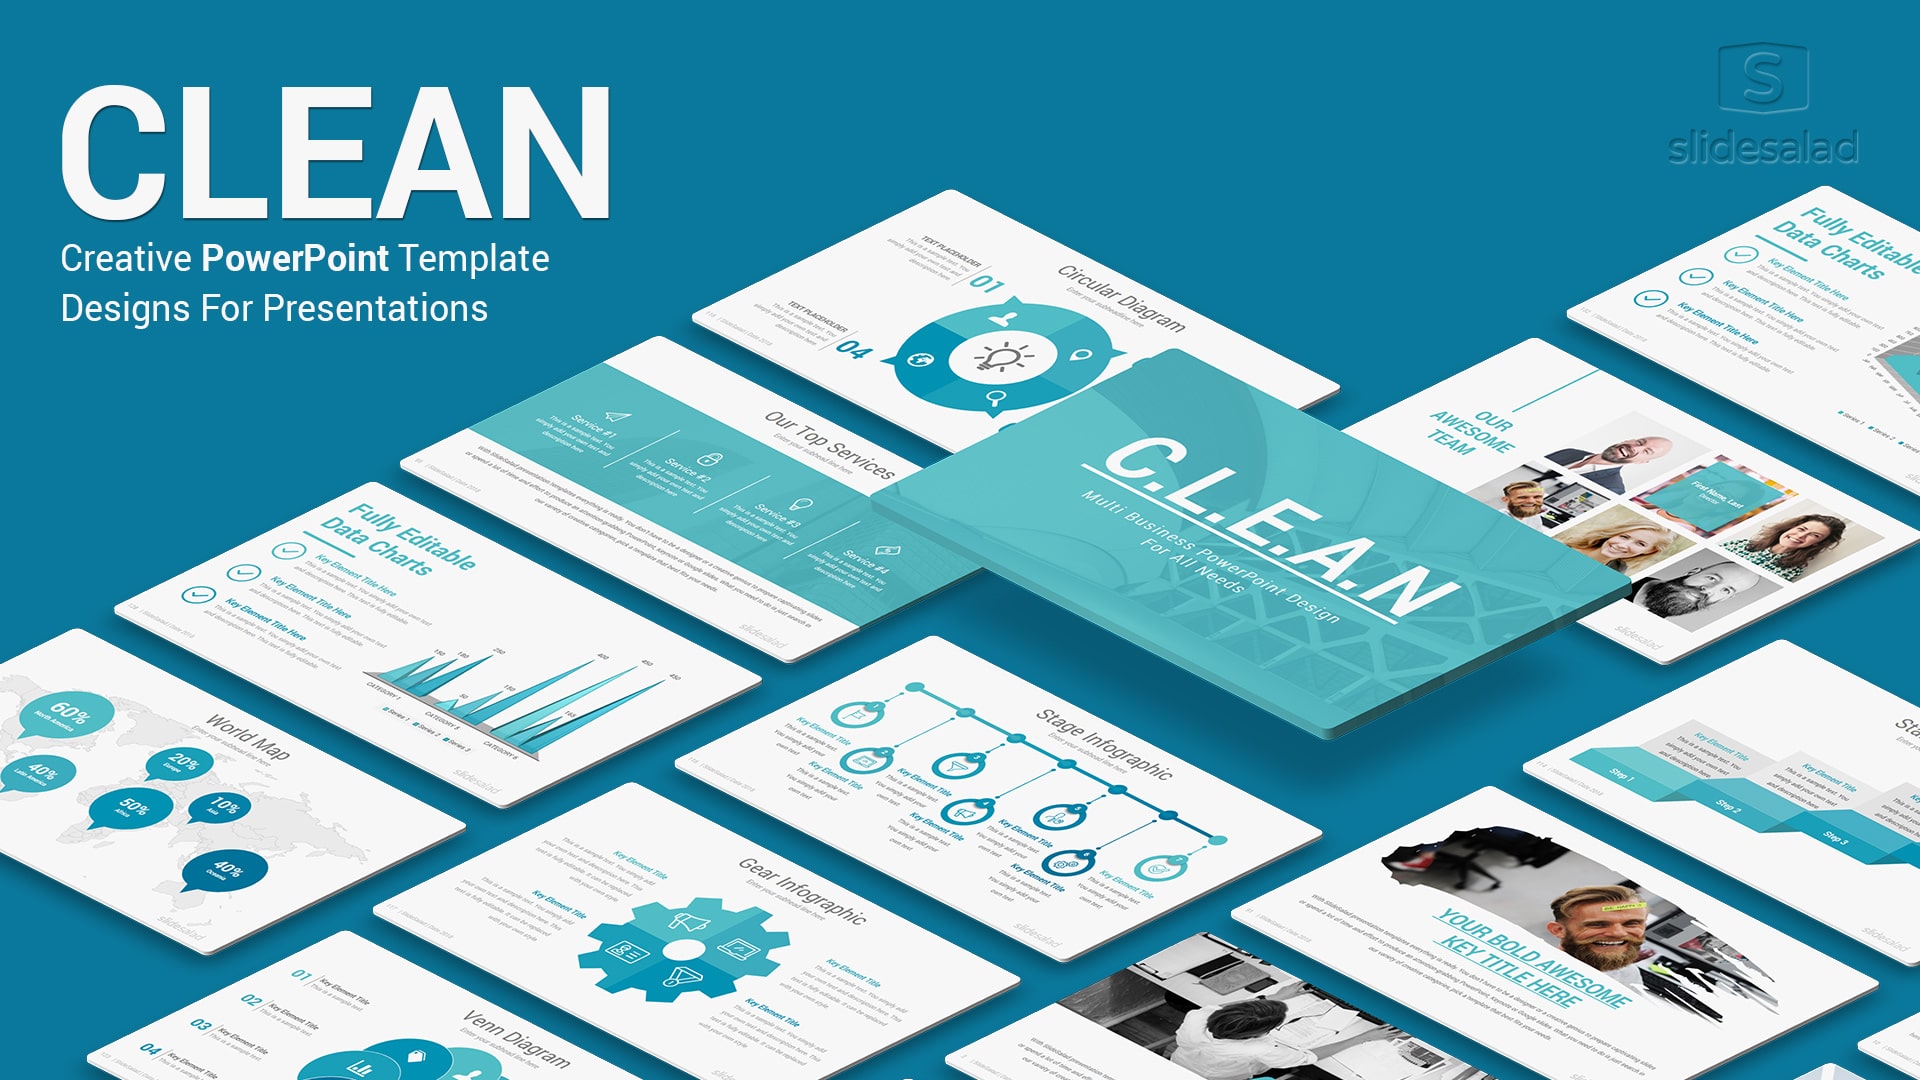 Clean Business PowerPoint Templates - Nice PPT Templates for Amazing Presentations